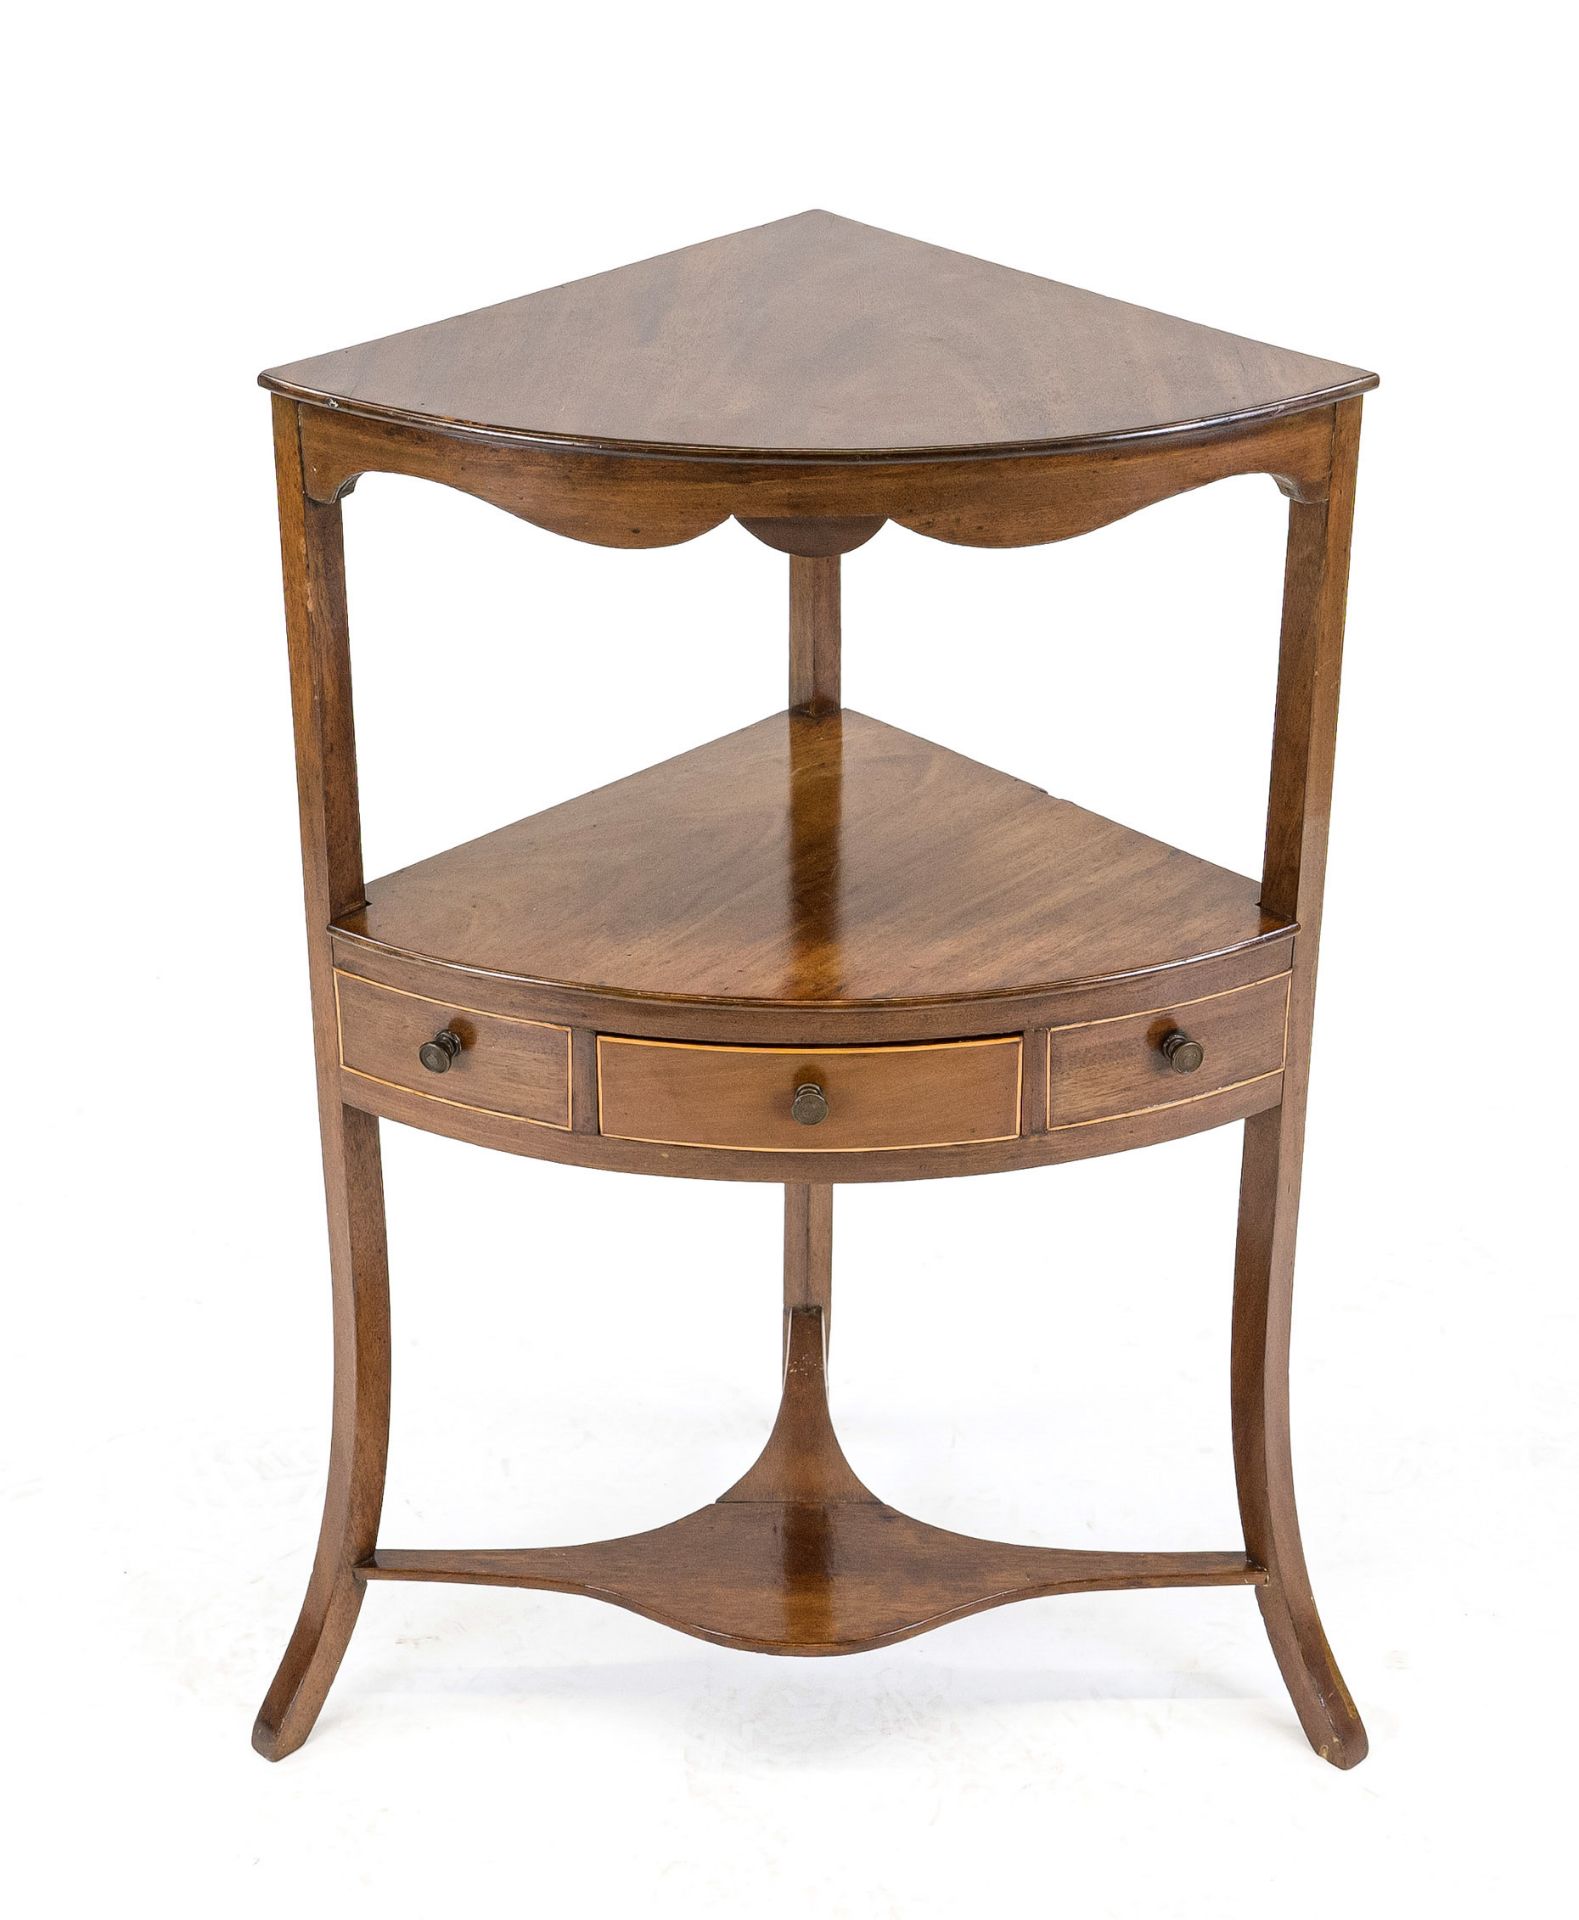 Corner console, England 19th century, mahogany, curved frame, frame with drawer, 81 x 53 x 36 cm